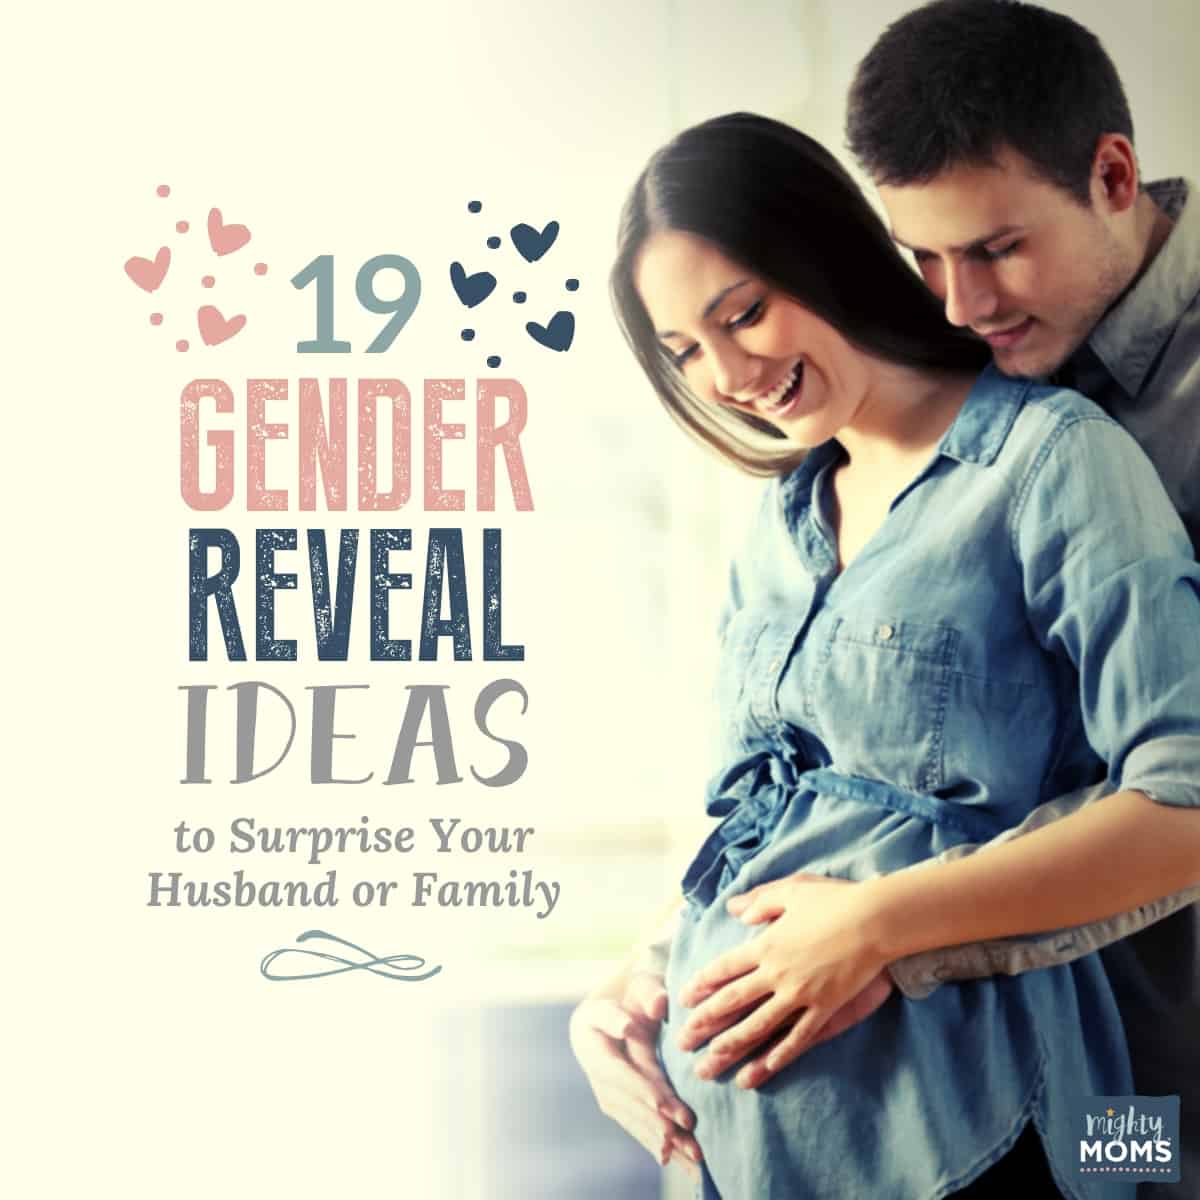 19 gender reveal ideas to try - MightyMoms.club